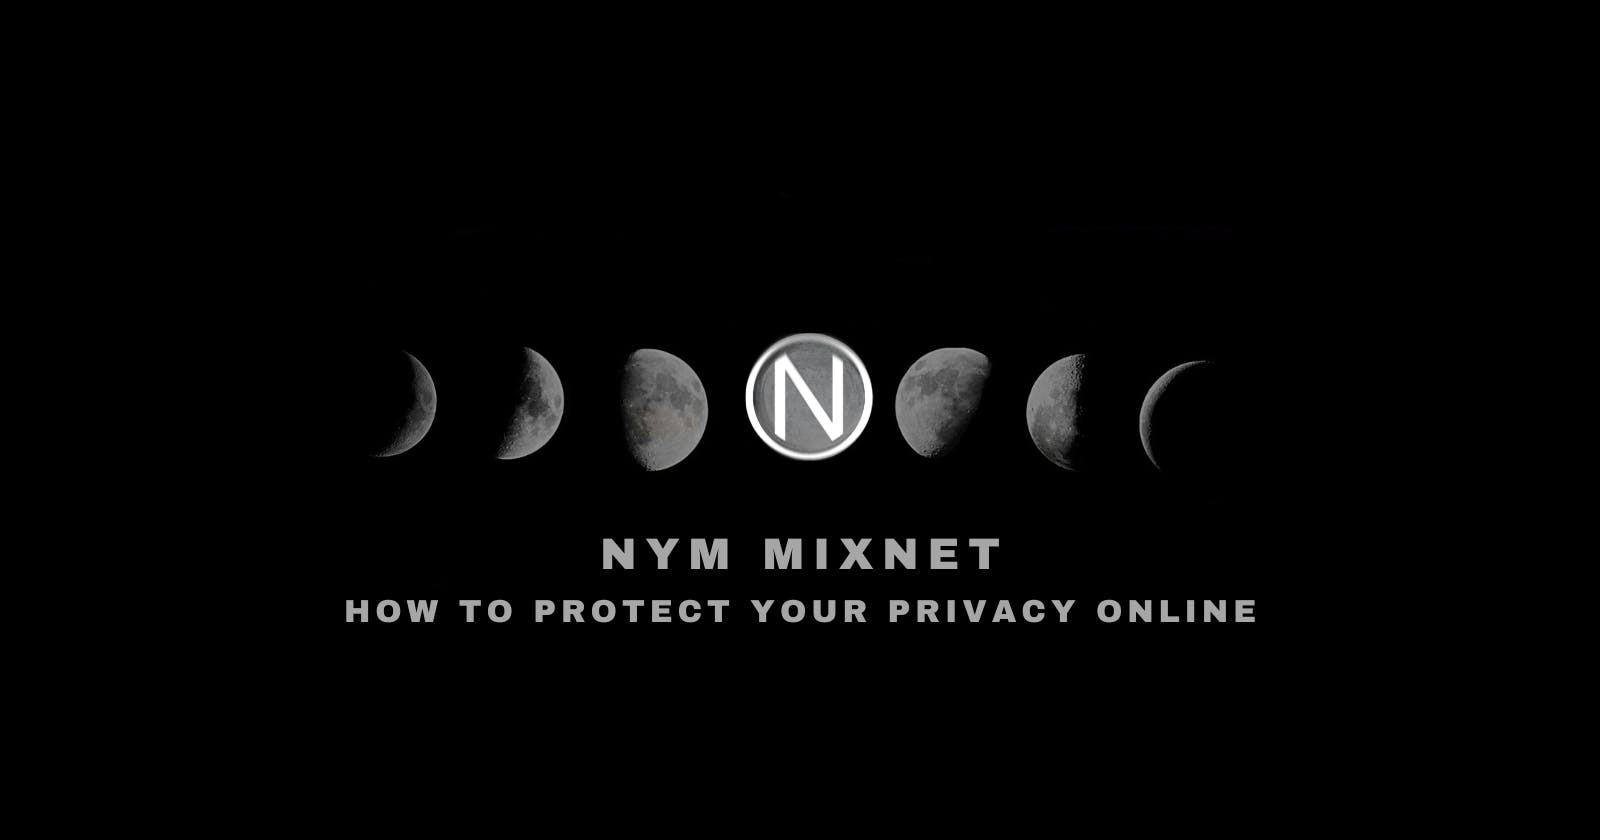 Nym mixnet: How to Protect Your Privacy Online